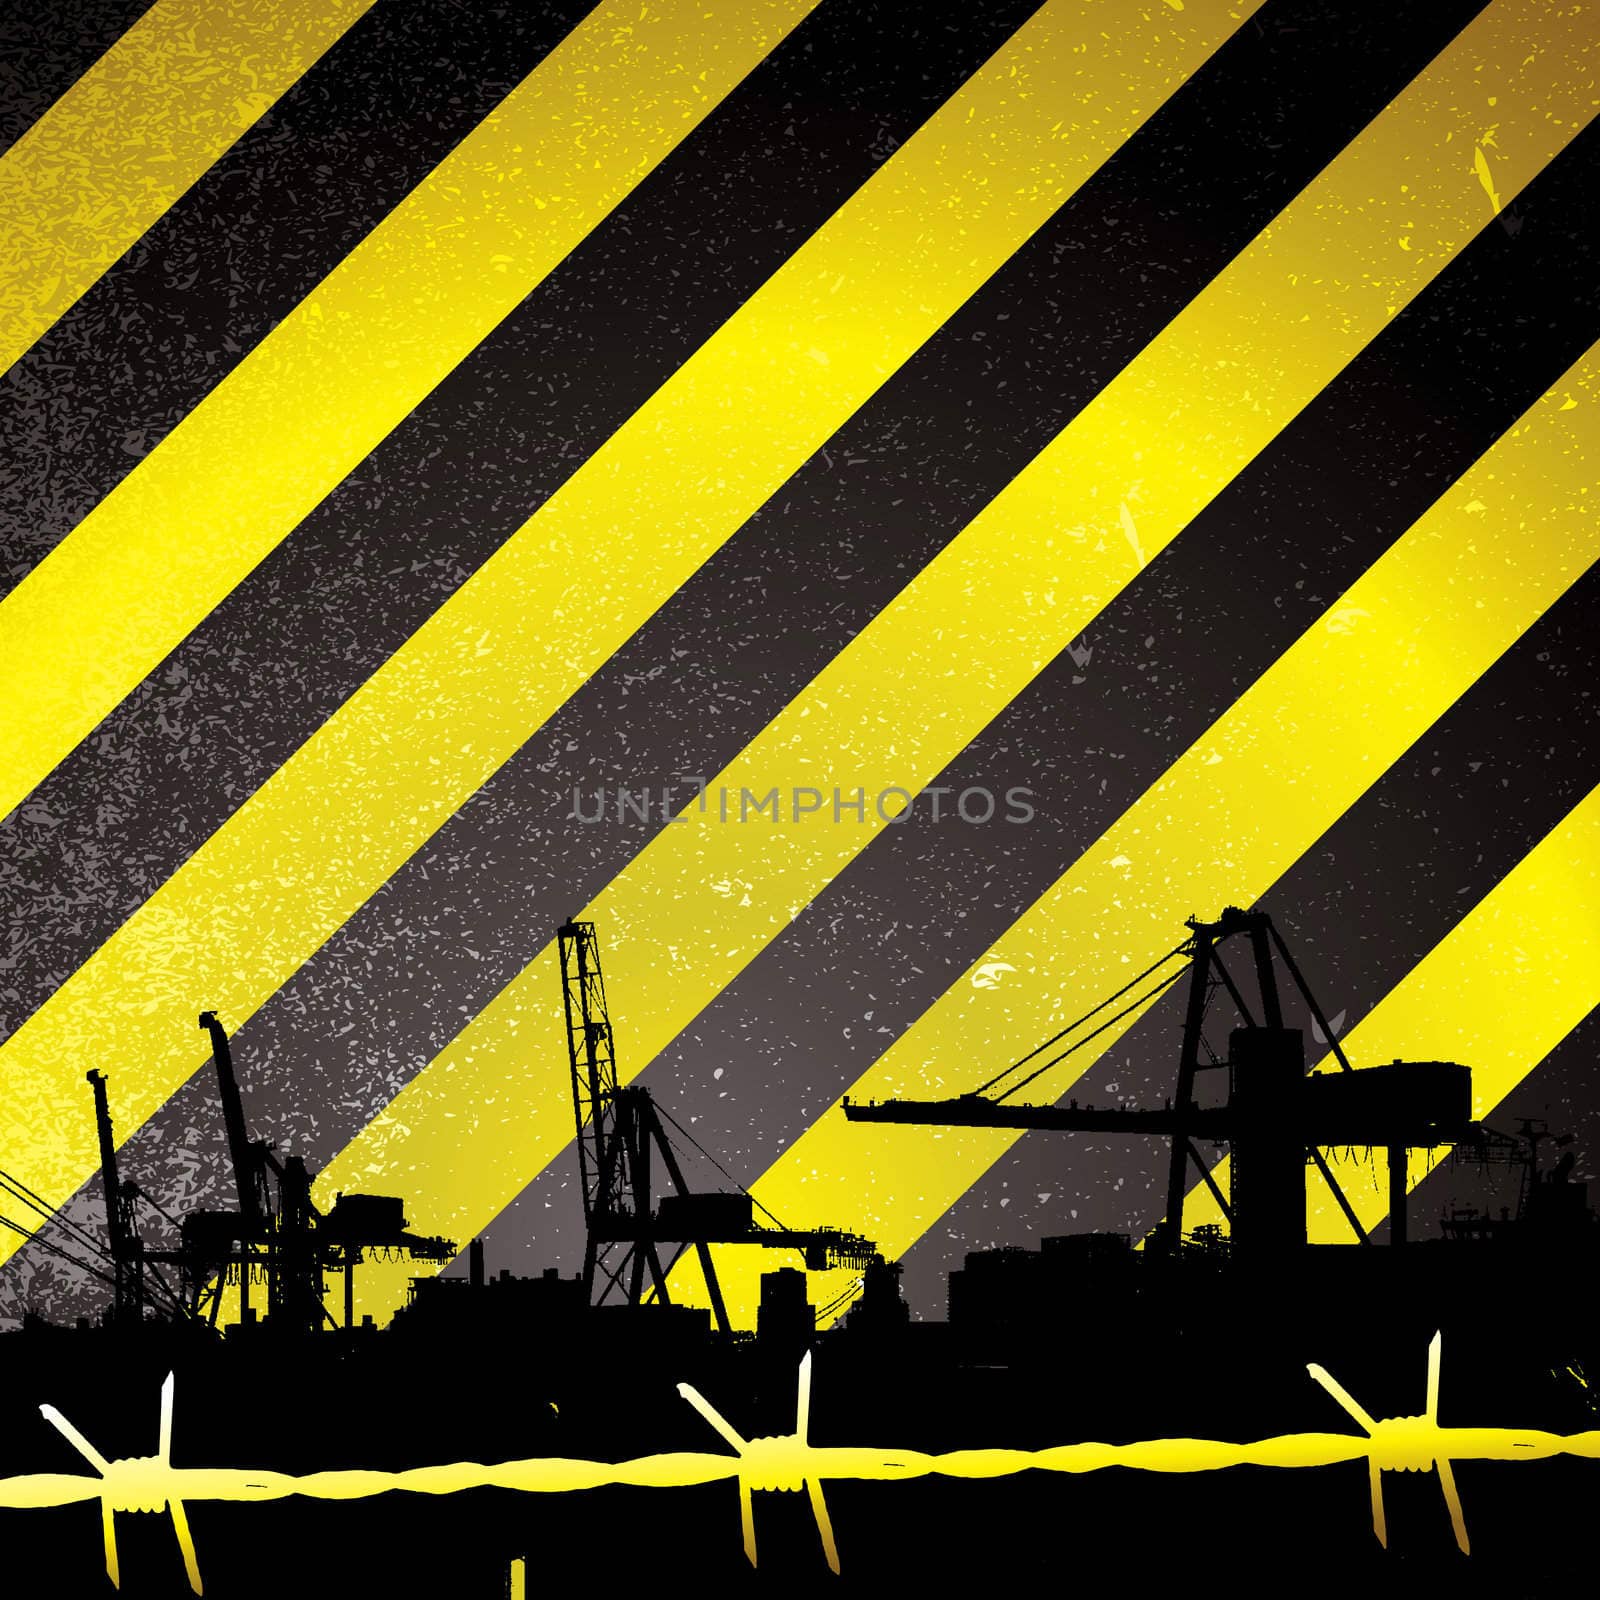 Crane silhouette with yellow and black stripes and barbwire